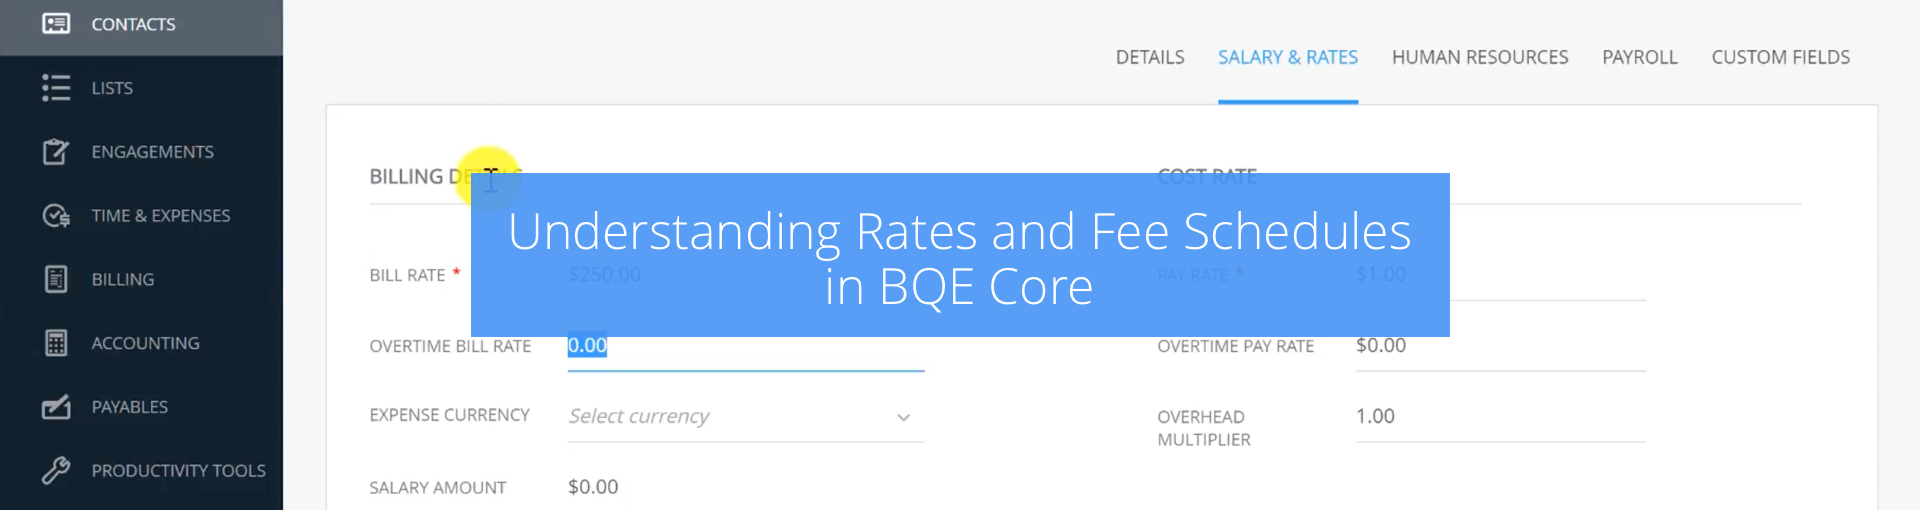 Understanding Rates and Fee Schedules in BQE CORE Featured Image